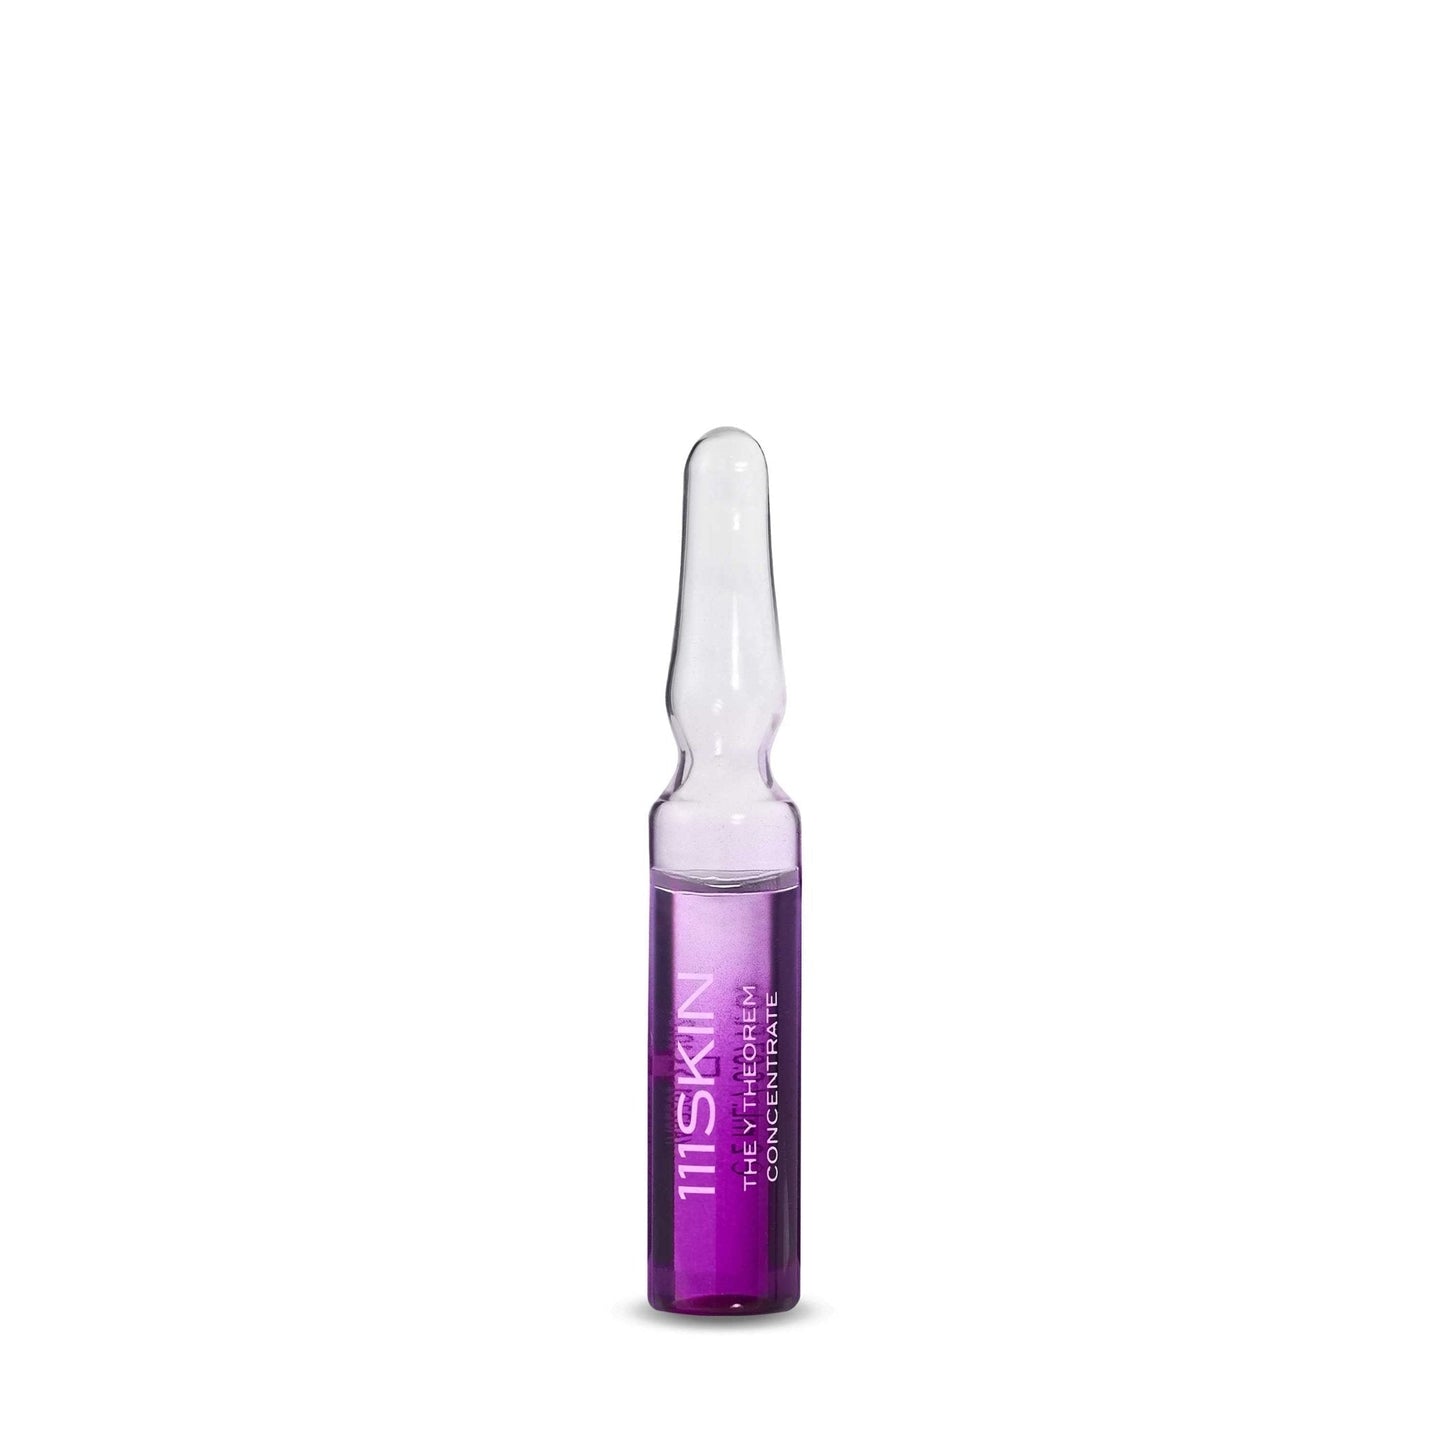 The Y Theorem Concentrate - 111SKIN UK